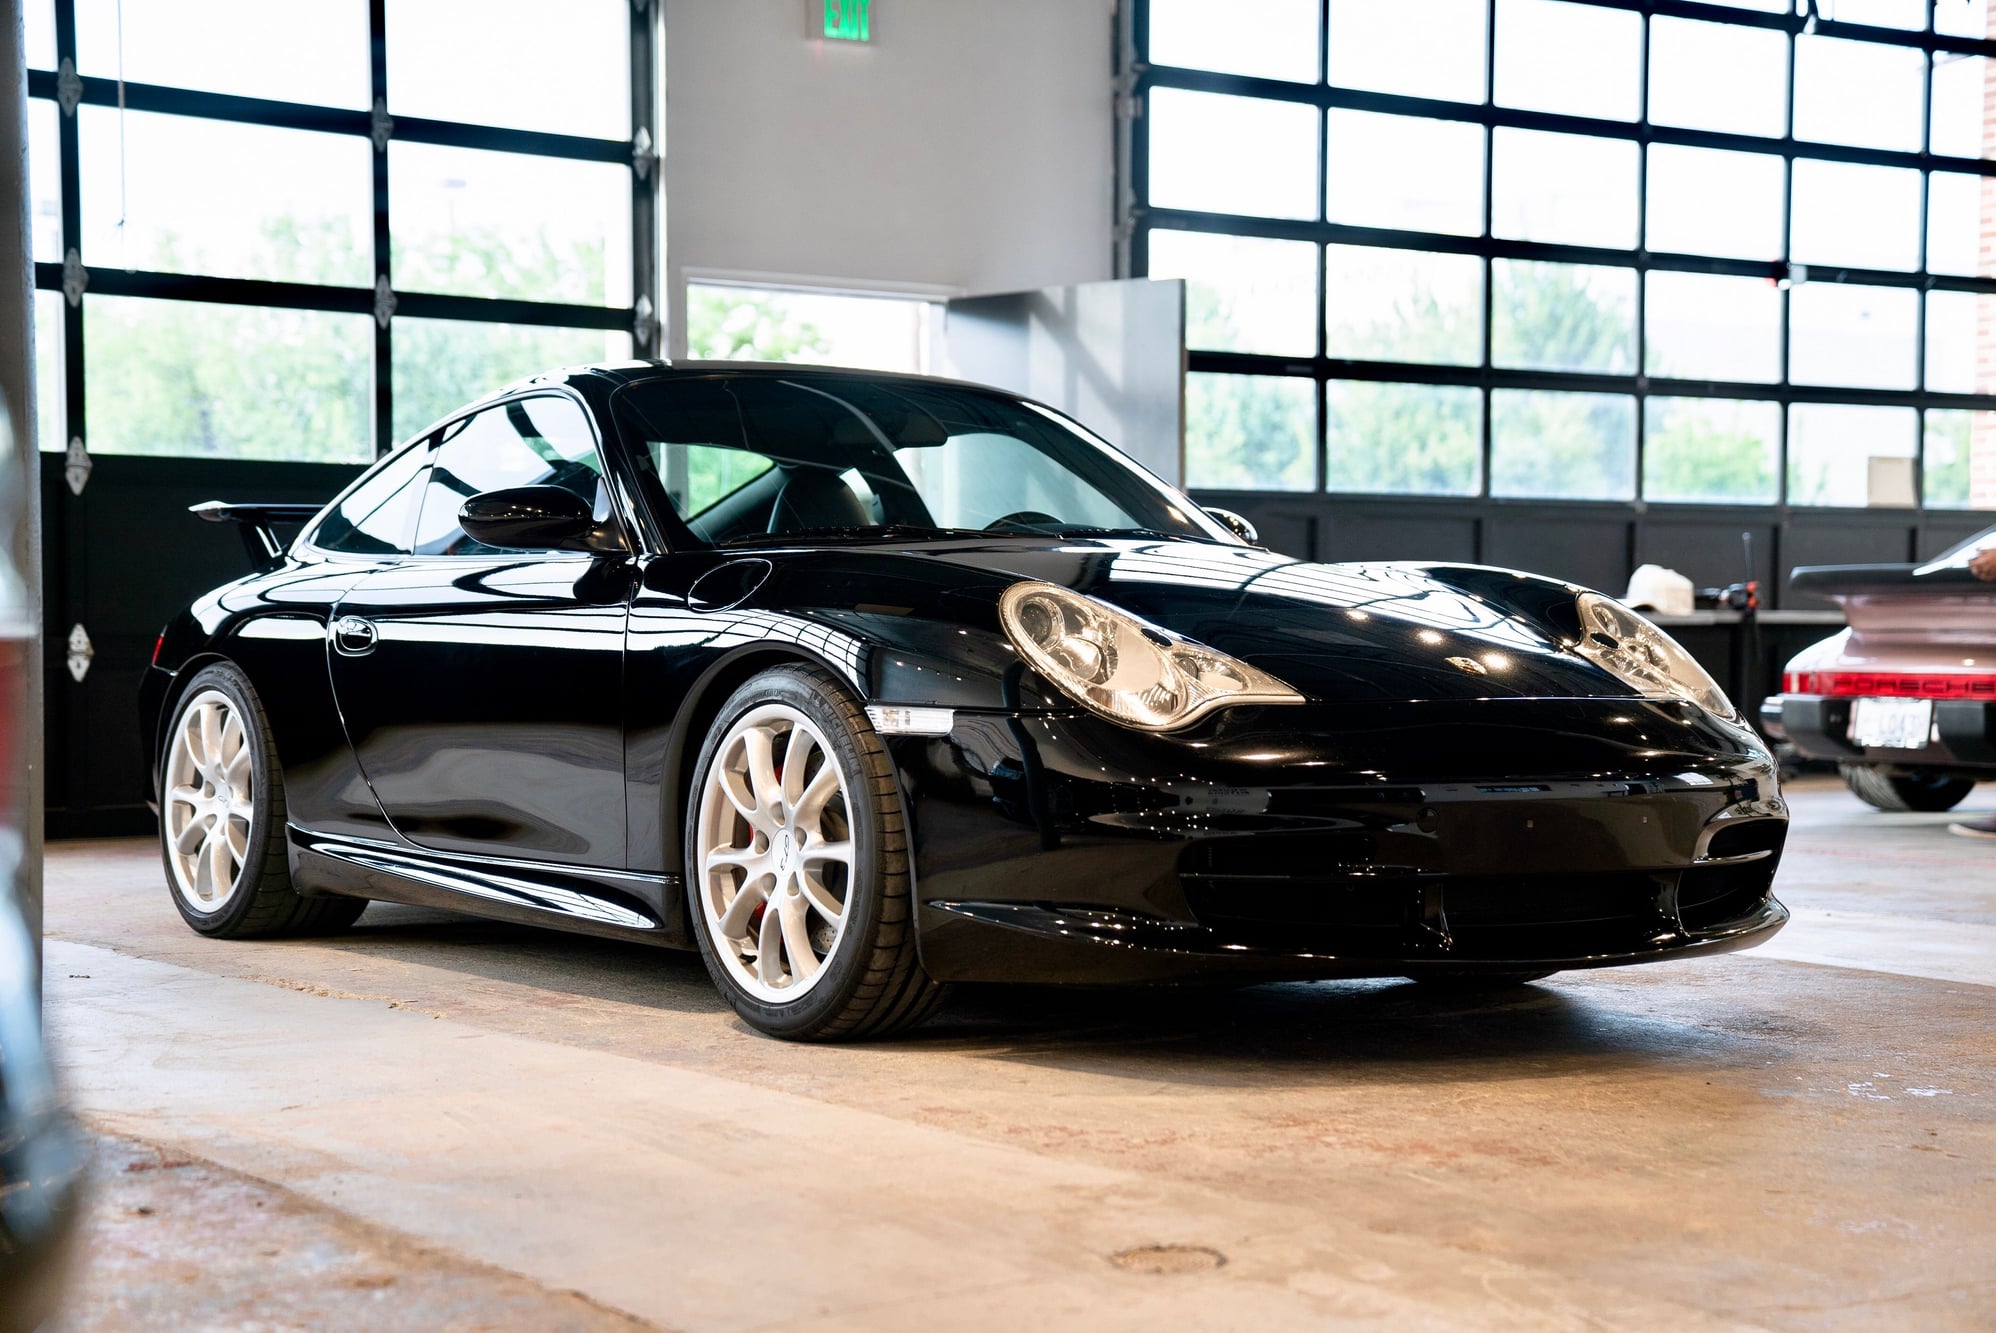 2004 Porsche GT3 - 2004 996.2 GT3 26K Miles Extremely Clean - Used - VIN WP0AC29904S692151 - 26,000 Miles - 6 cyl - 2WD - Manual - Coupe - Black - Salt Lake City, UT 84103, United States